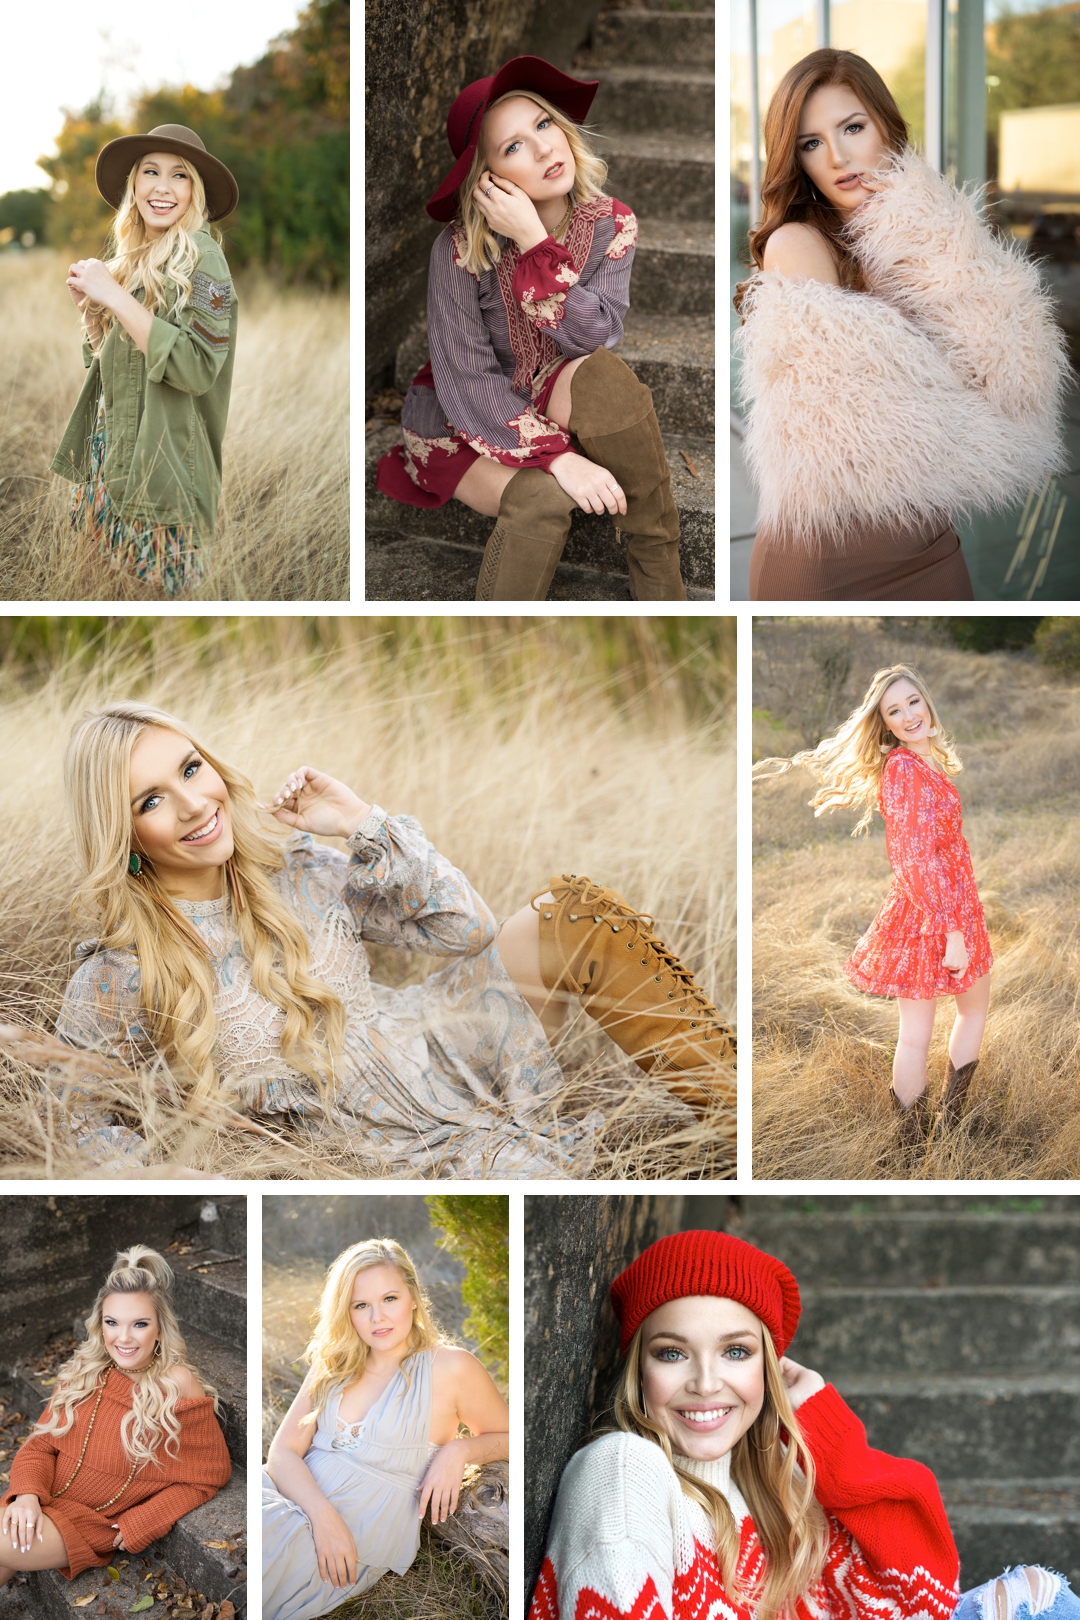 Which season should I book my senior session for?